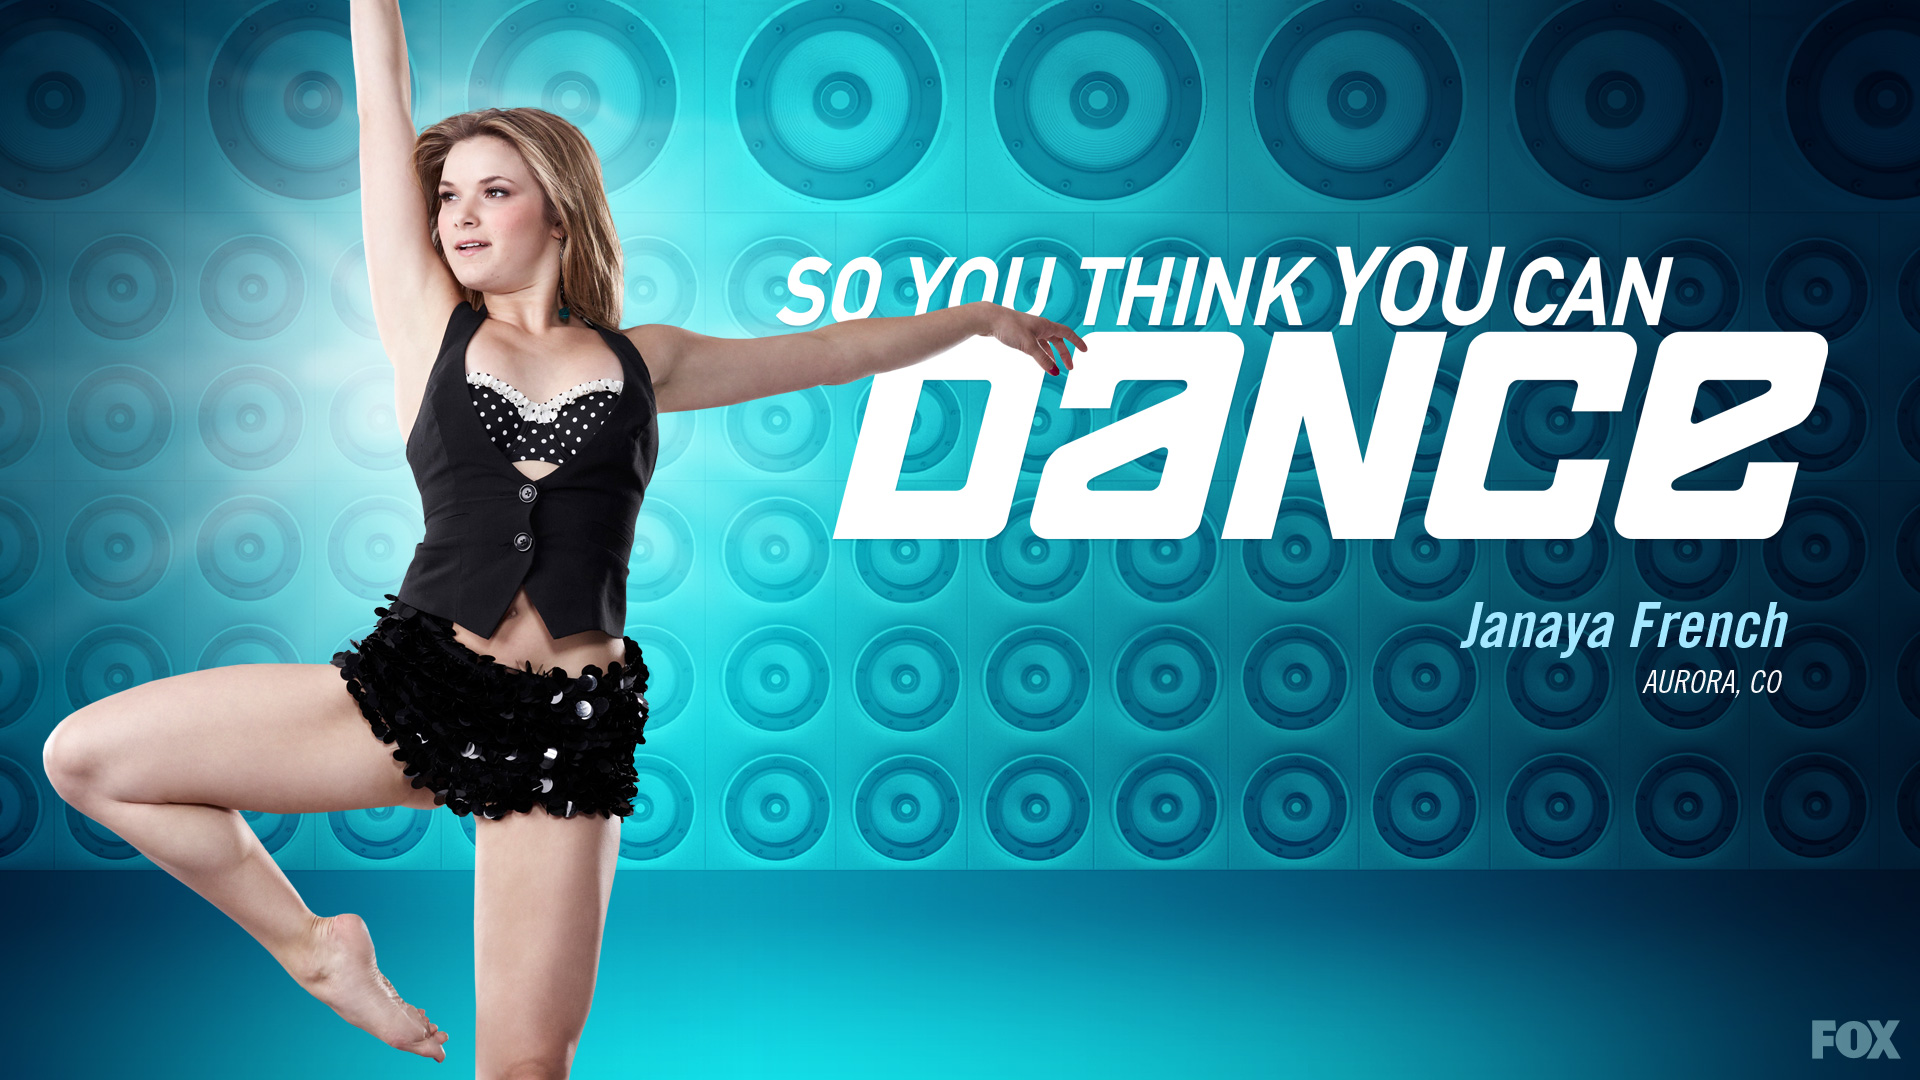 So You Think You Can Dance wallpaper 13